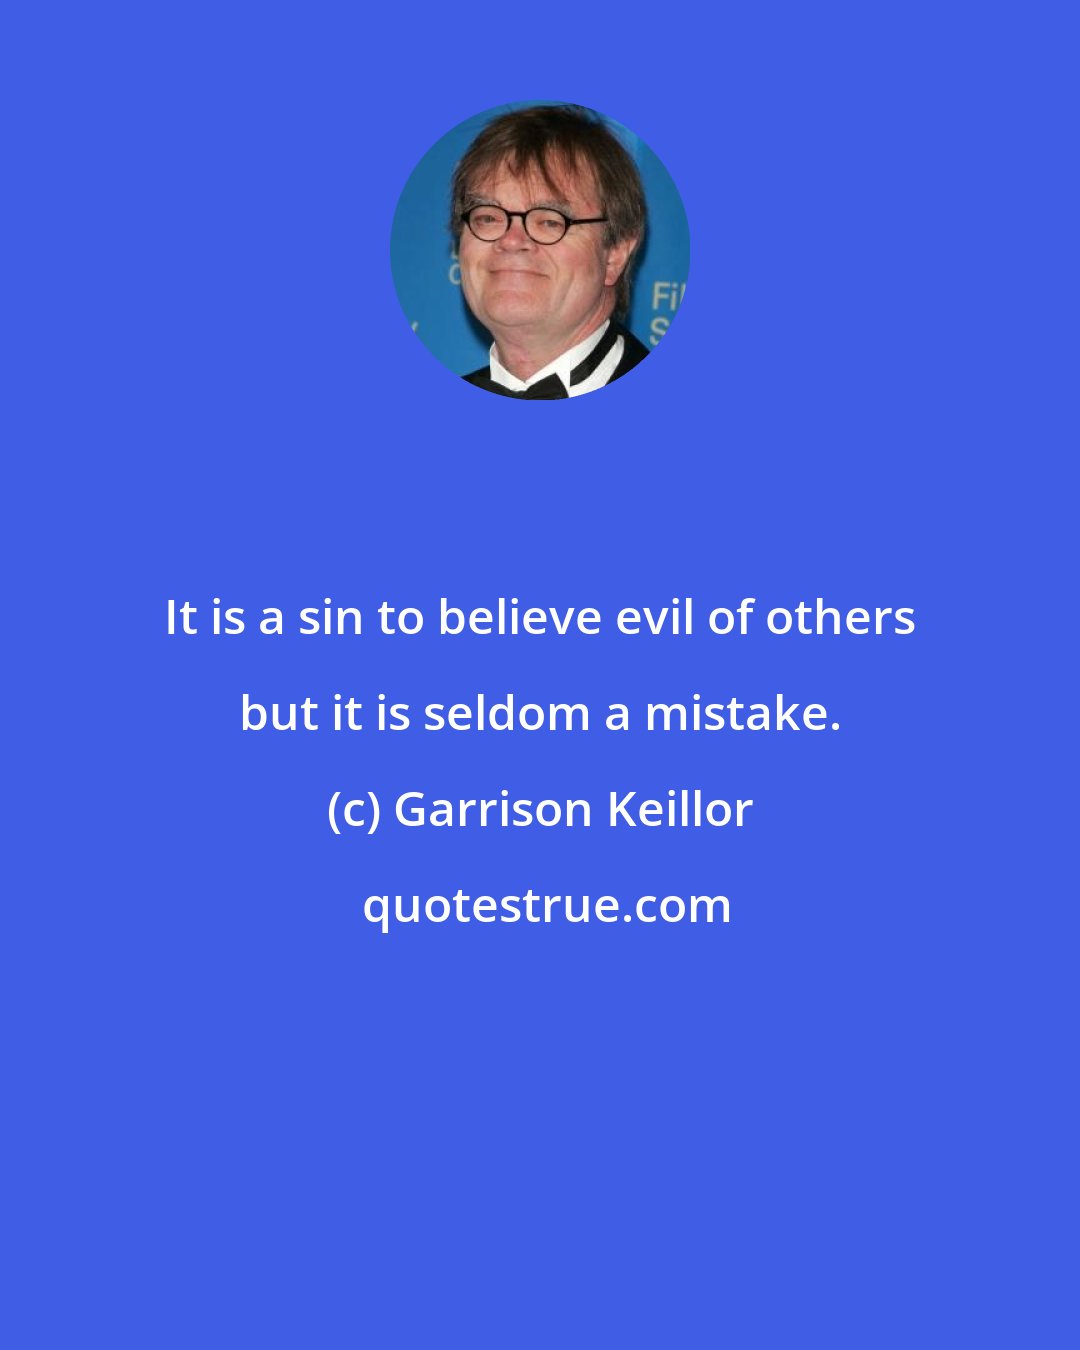 Garrison Keillor: It is a sin to believe evil of others but it is seldom a mistake.